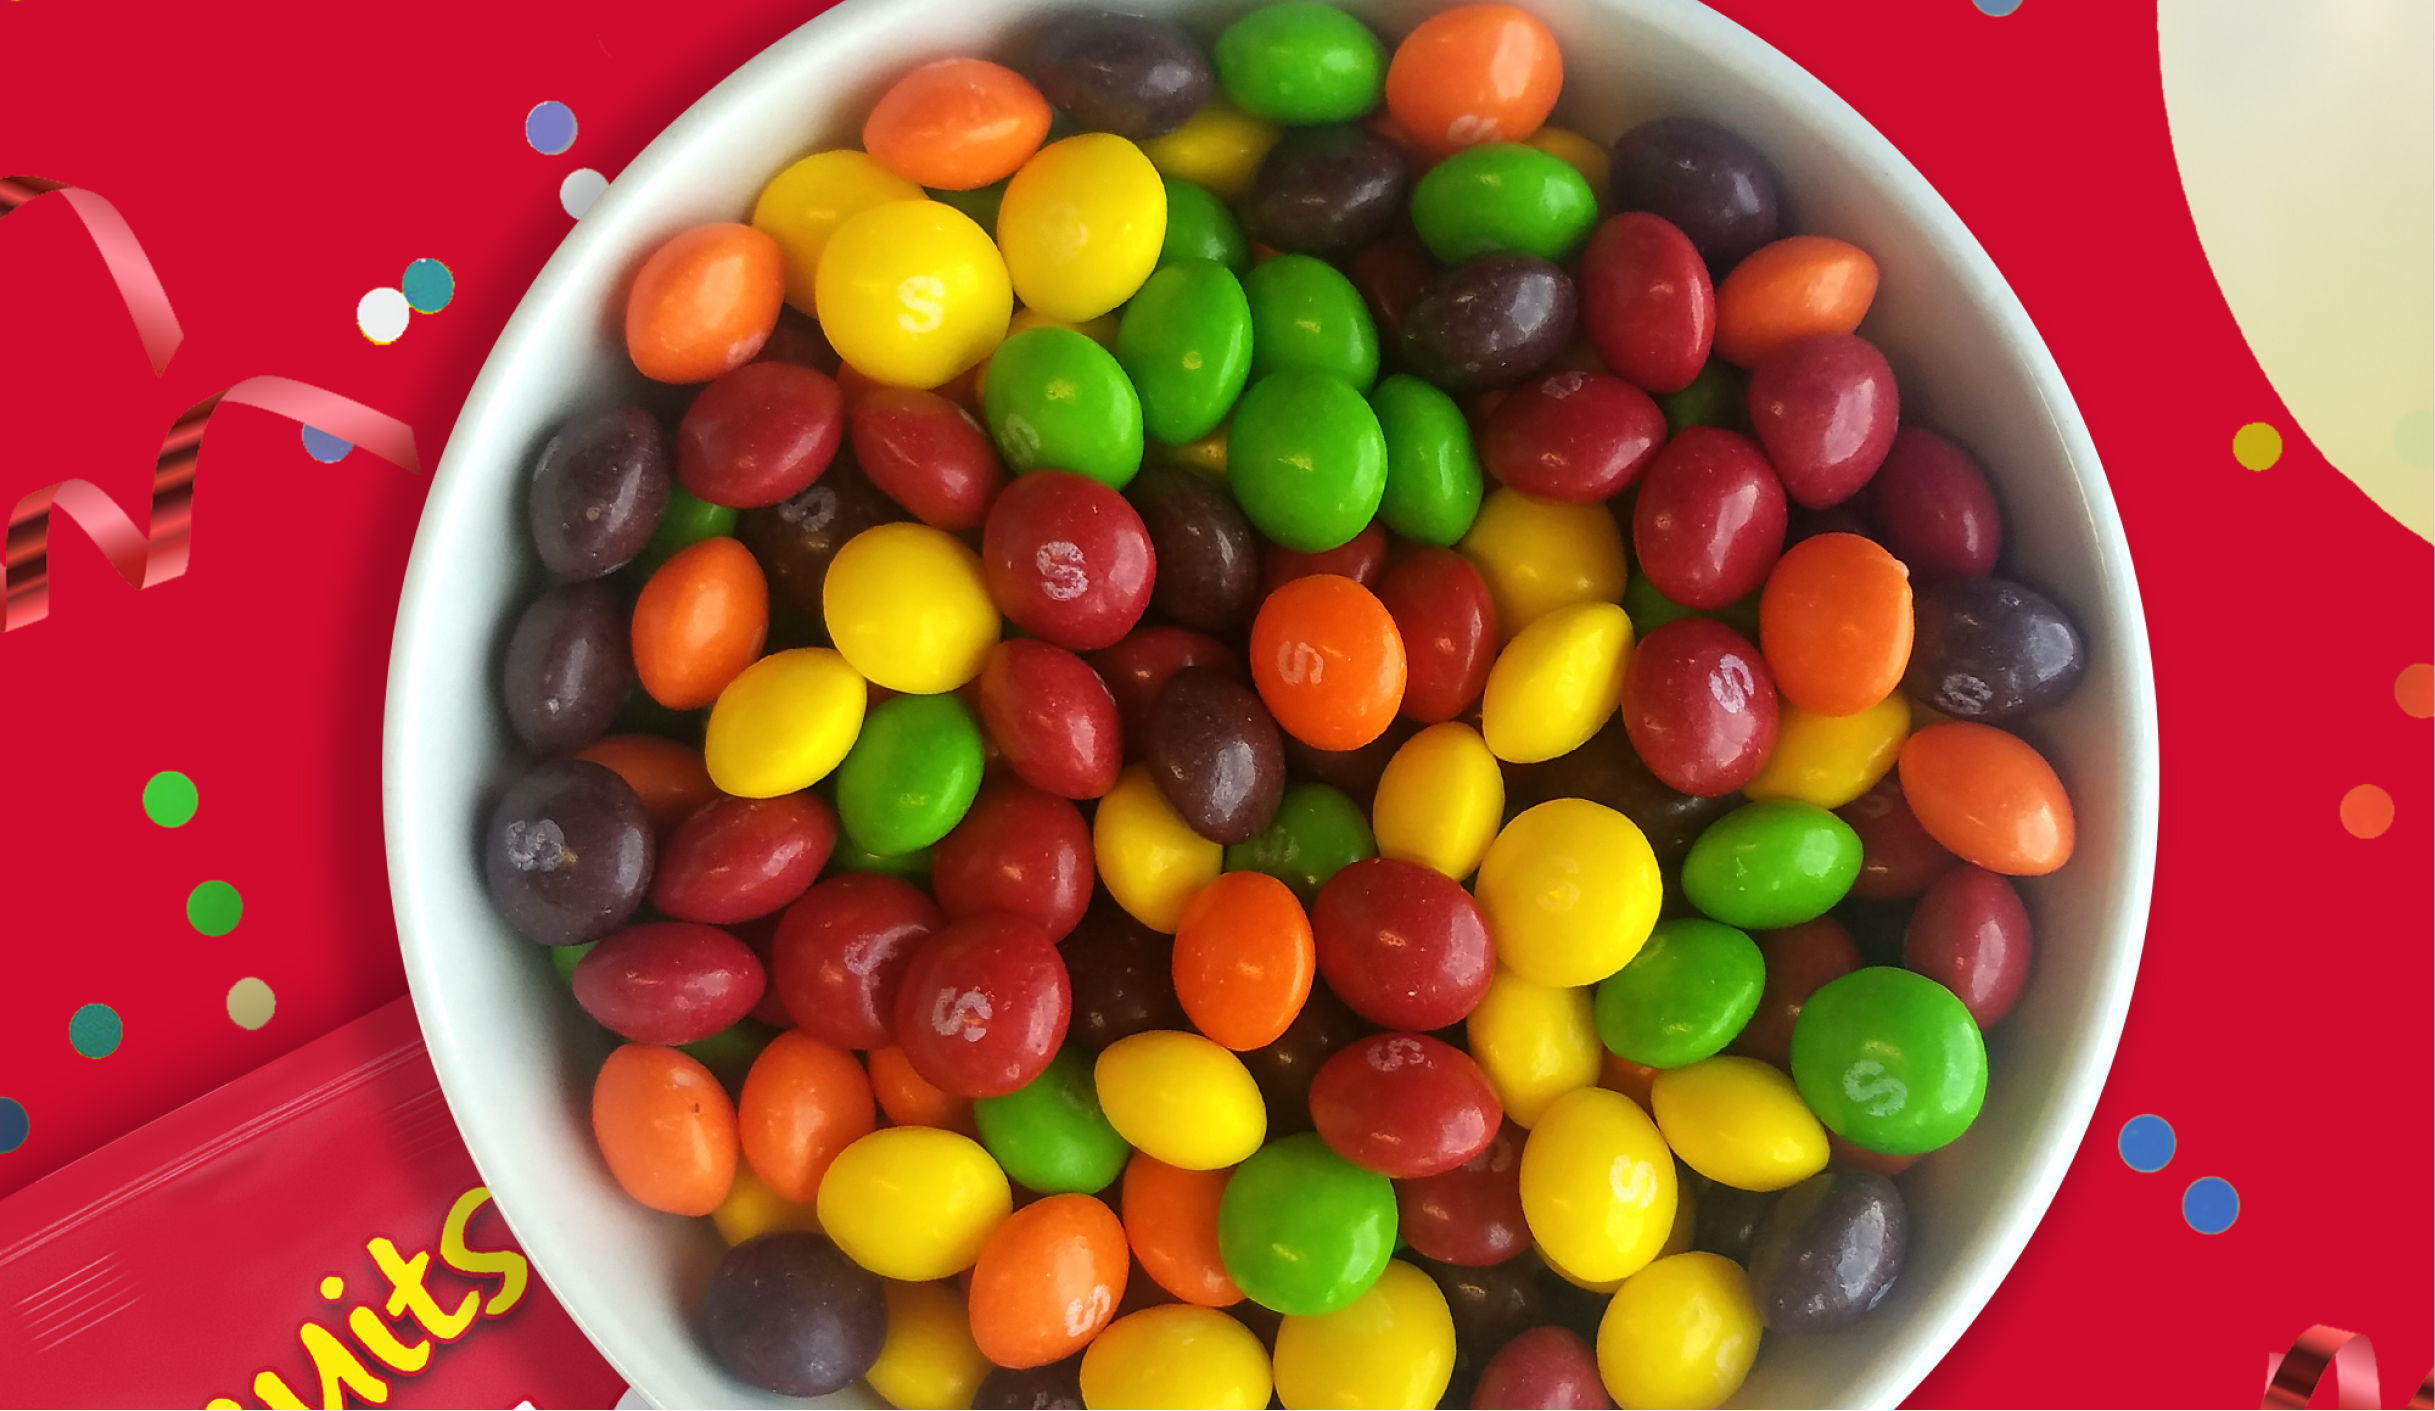 Skittles lentils in a party bowl 